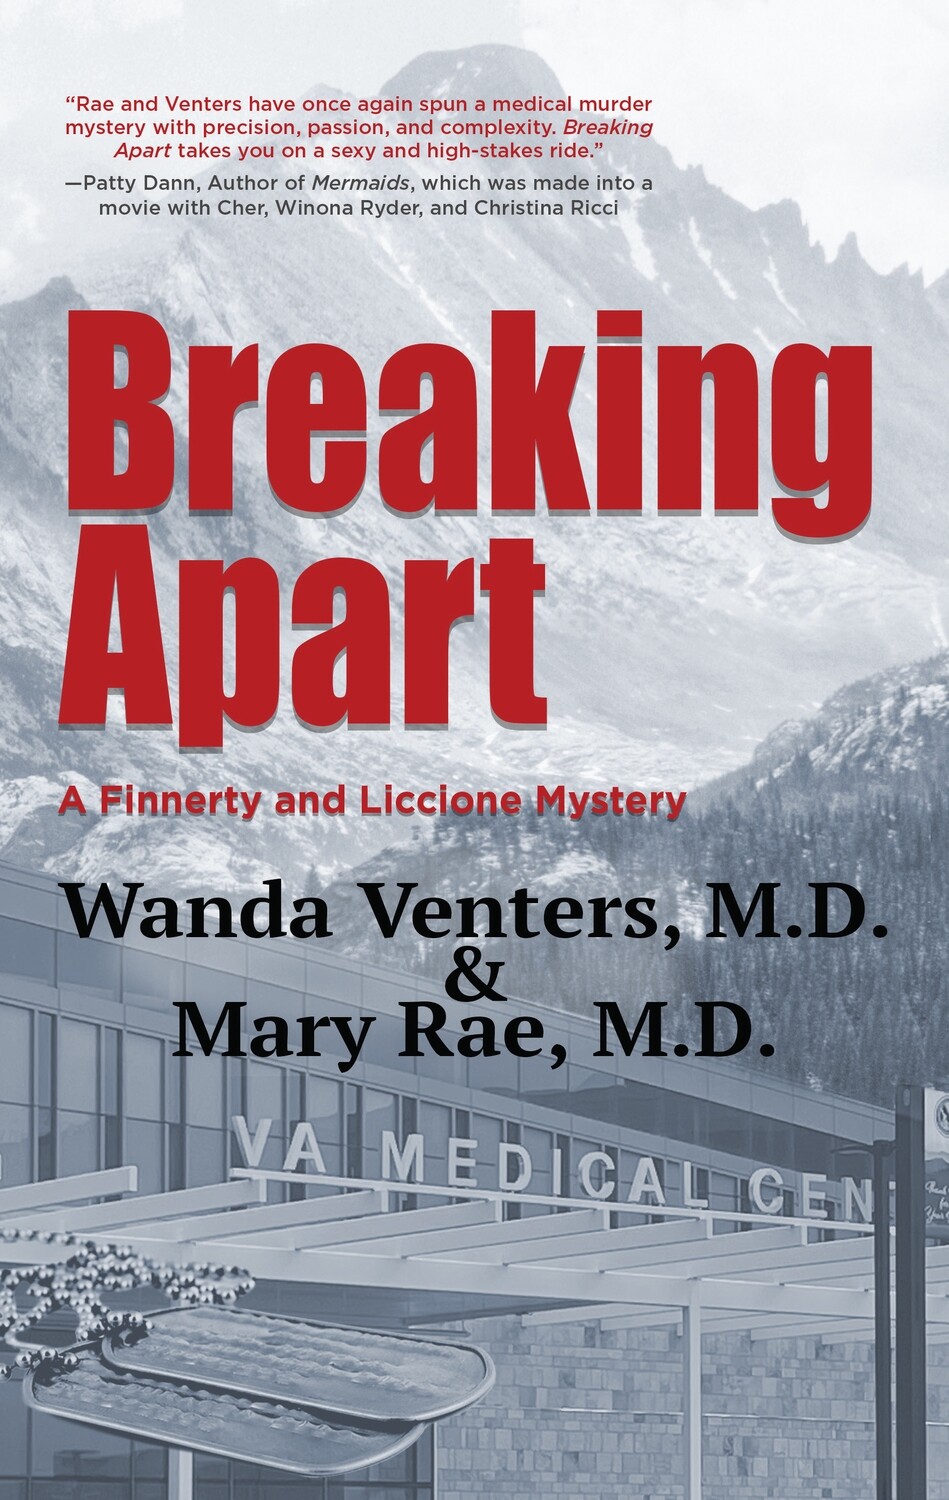 Breaking Apart by Wanda Venters, M.D. and Mary Rae, M.D.